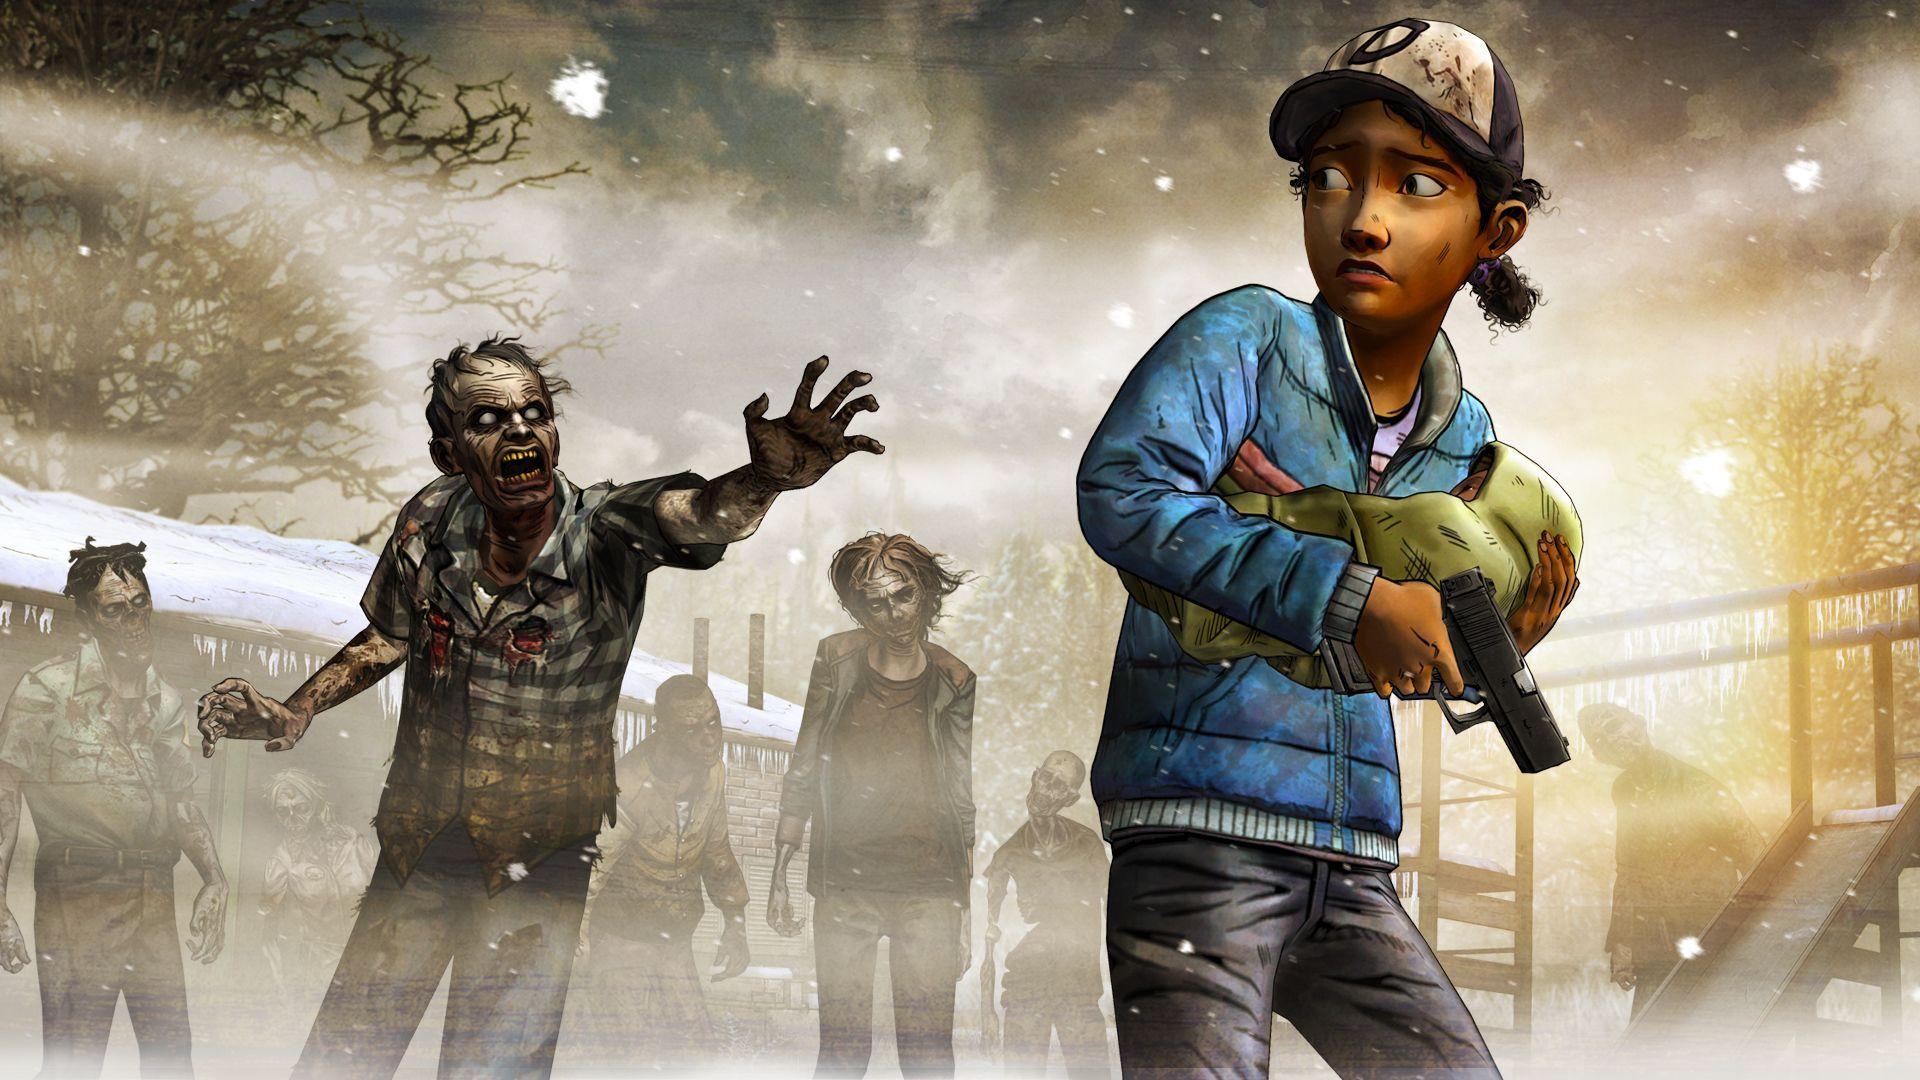 The Walking Dead&;s S2 concludes with No Going Back on August 26